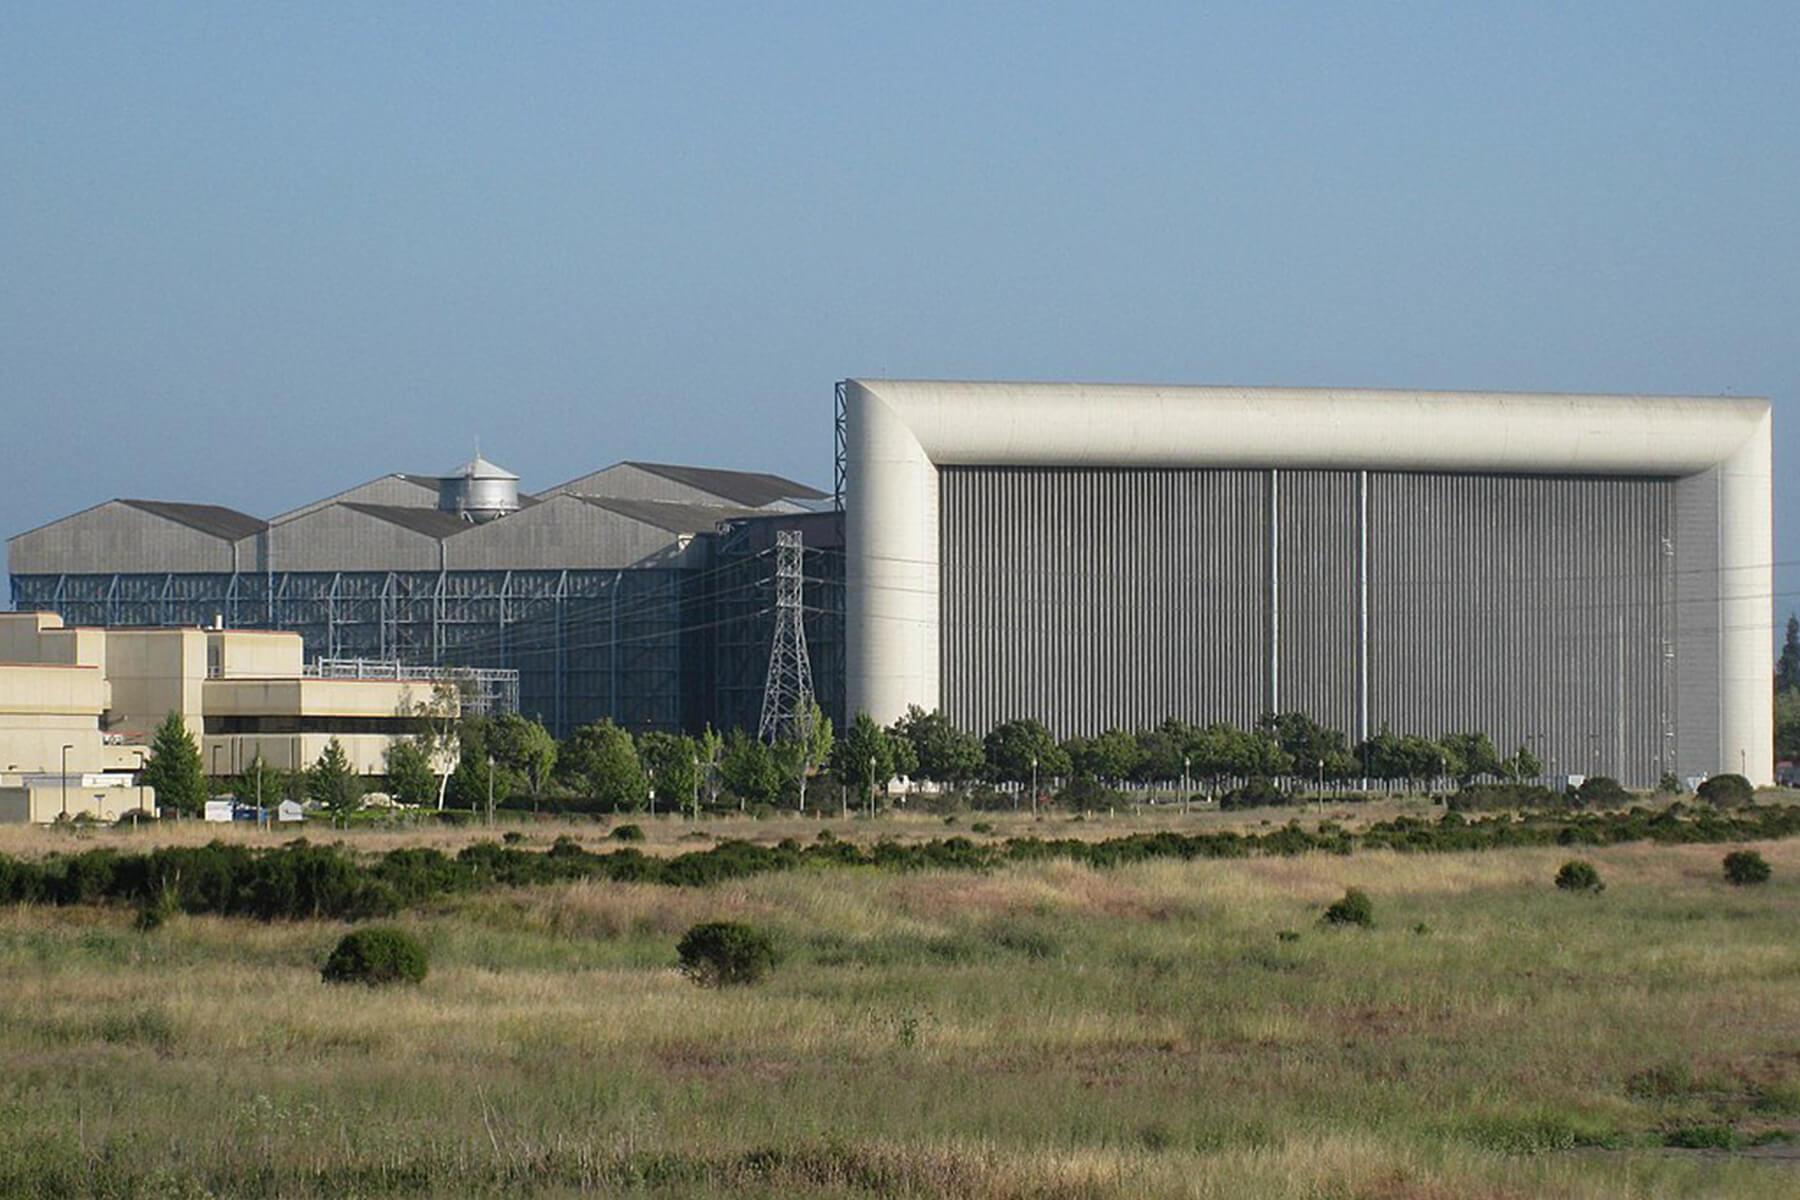 An exterior view of a very large grey wind tunnel building with fields in the foreground.